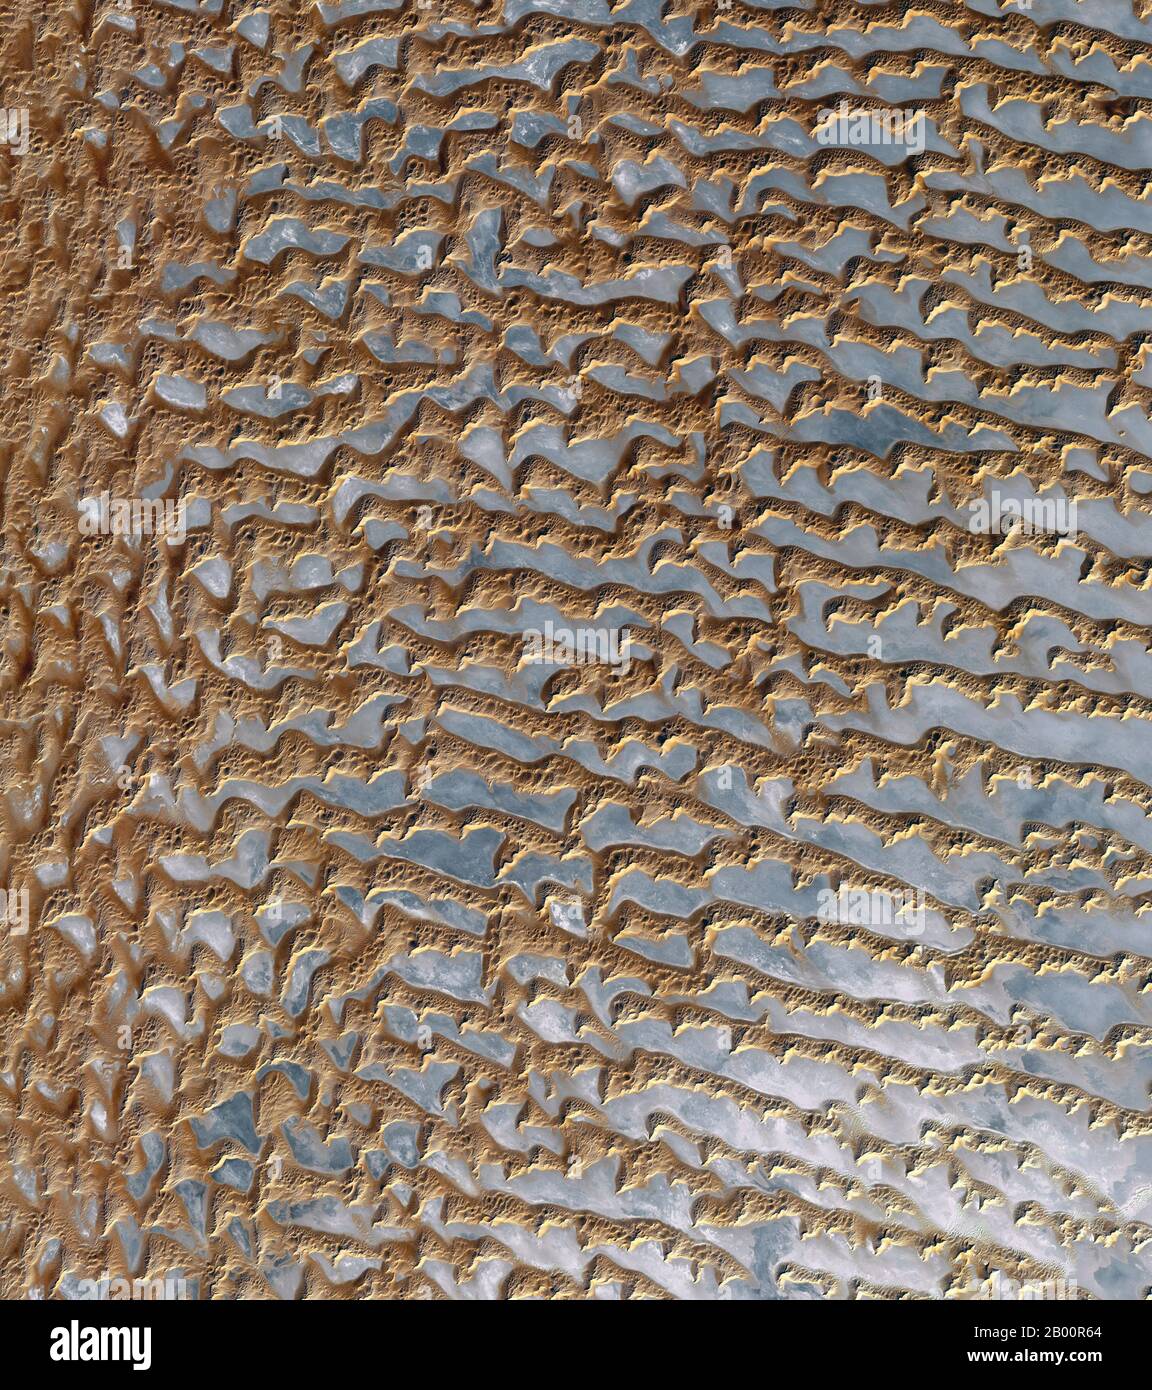 Arabia: A view from space of sand dunes in Rub' al Khali, ‘the Empty Quarter’ in Arabic, a vast and arid desert encompassing most of the southern third of the Arabian Peninsula. The image, acquired by the Advanced Spaceborne Thermal Emission and Reflection Radiometer (ASTER) aboard NASA's Terra satellite, shows dunes as brown with gray regions being the underlying gravel plains. The distance between parallel dunes, which can reach 330 metres (1,080 ft) in height, is roughly 1.5 to 2.5 km (0.9 to 1.6 miles). The area is neither inhabited nor traversed by humans, although some life does exist. Stock Photo